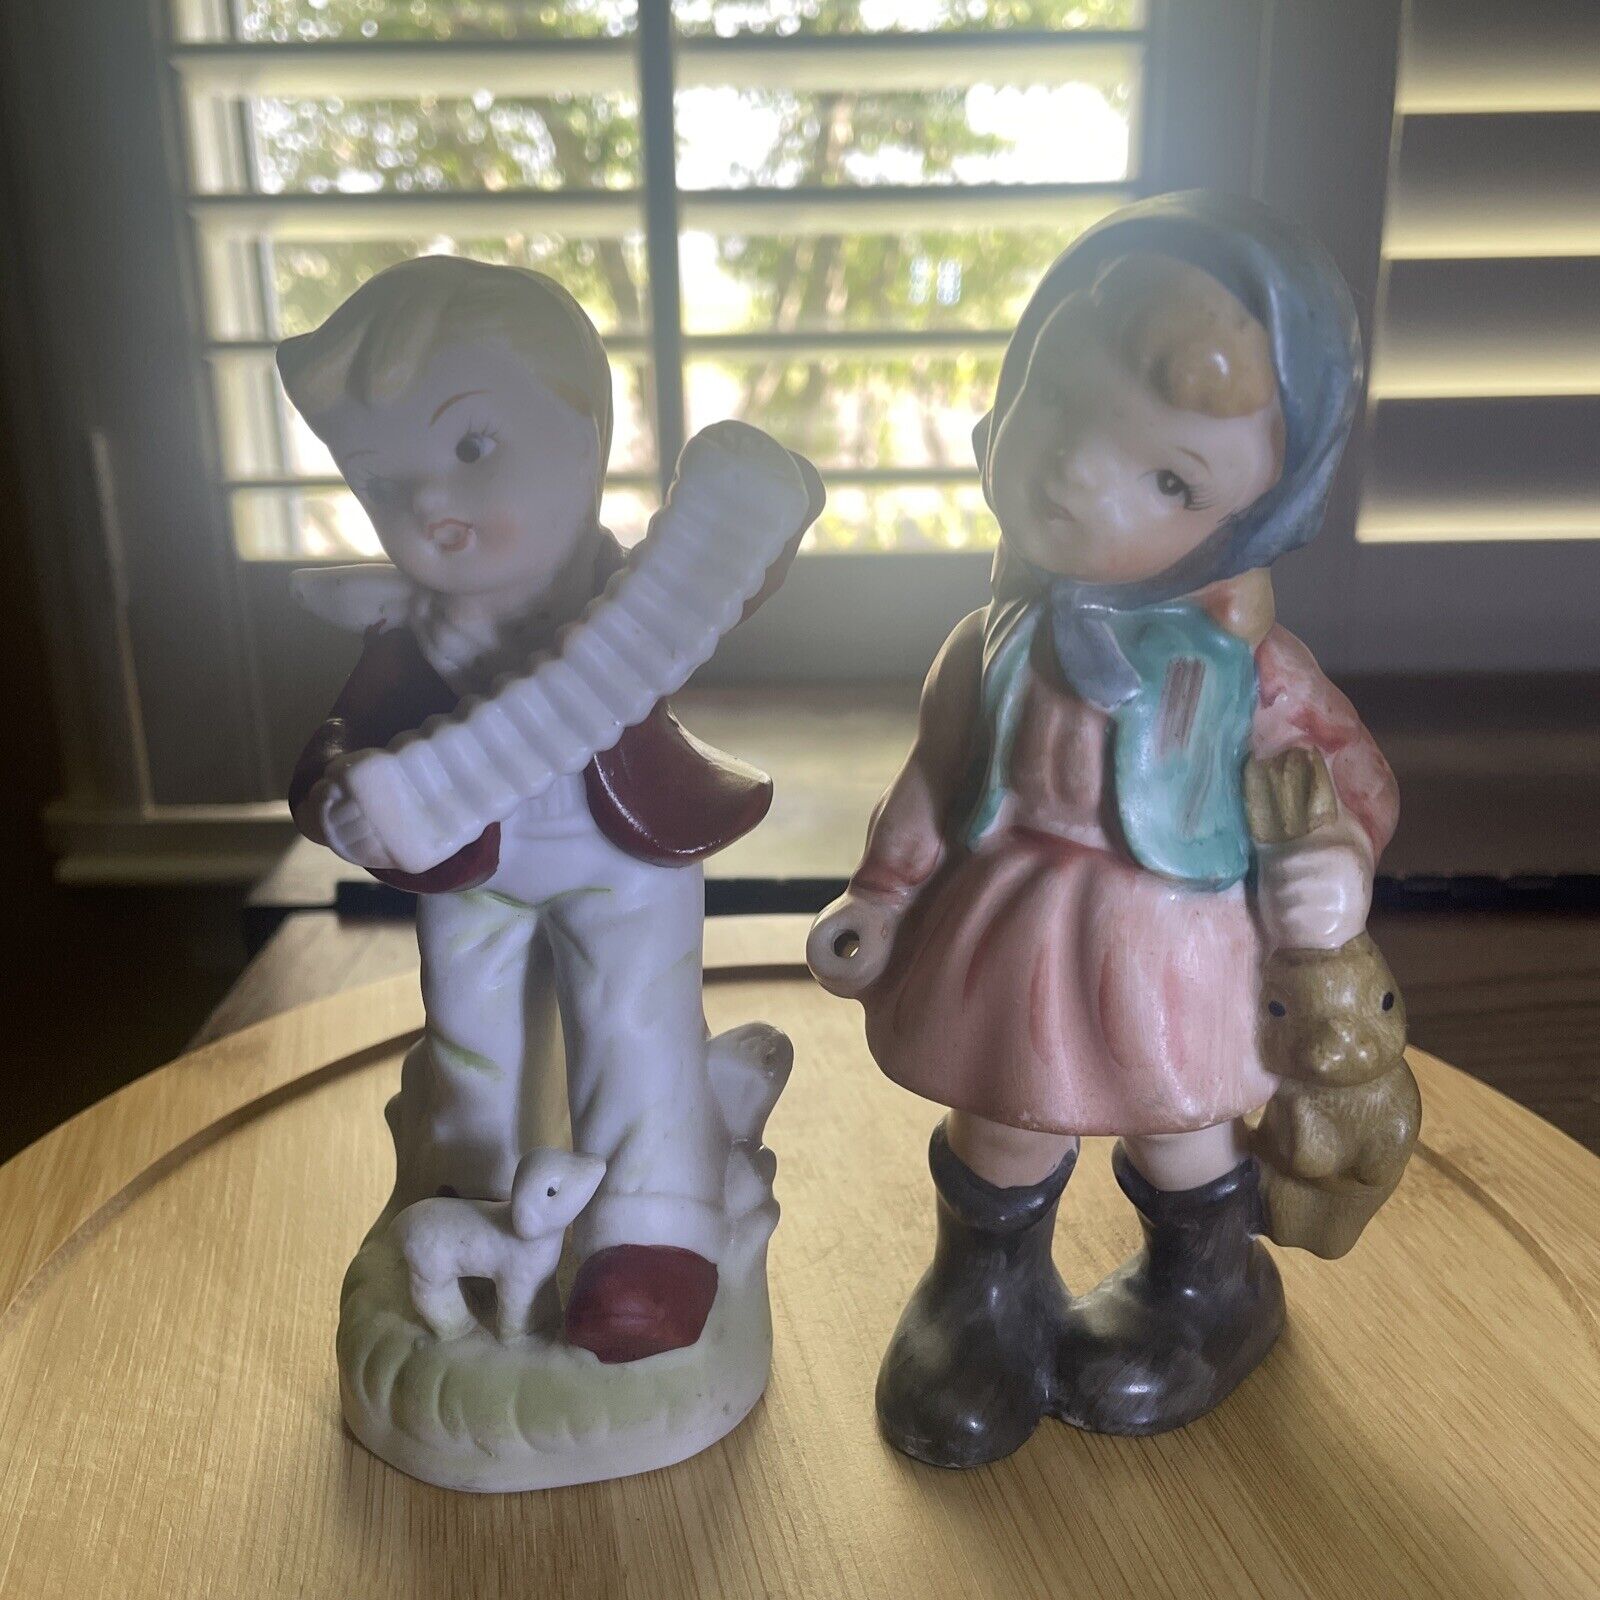 Vintage Bisque Boy with Accordion and Lamb,Girl With Rabbit 5”-5 1/2” figurines.